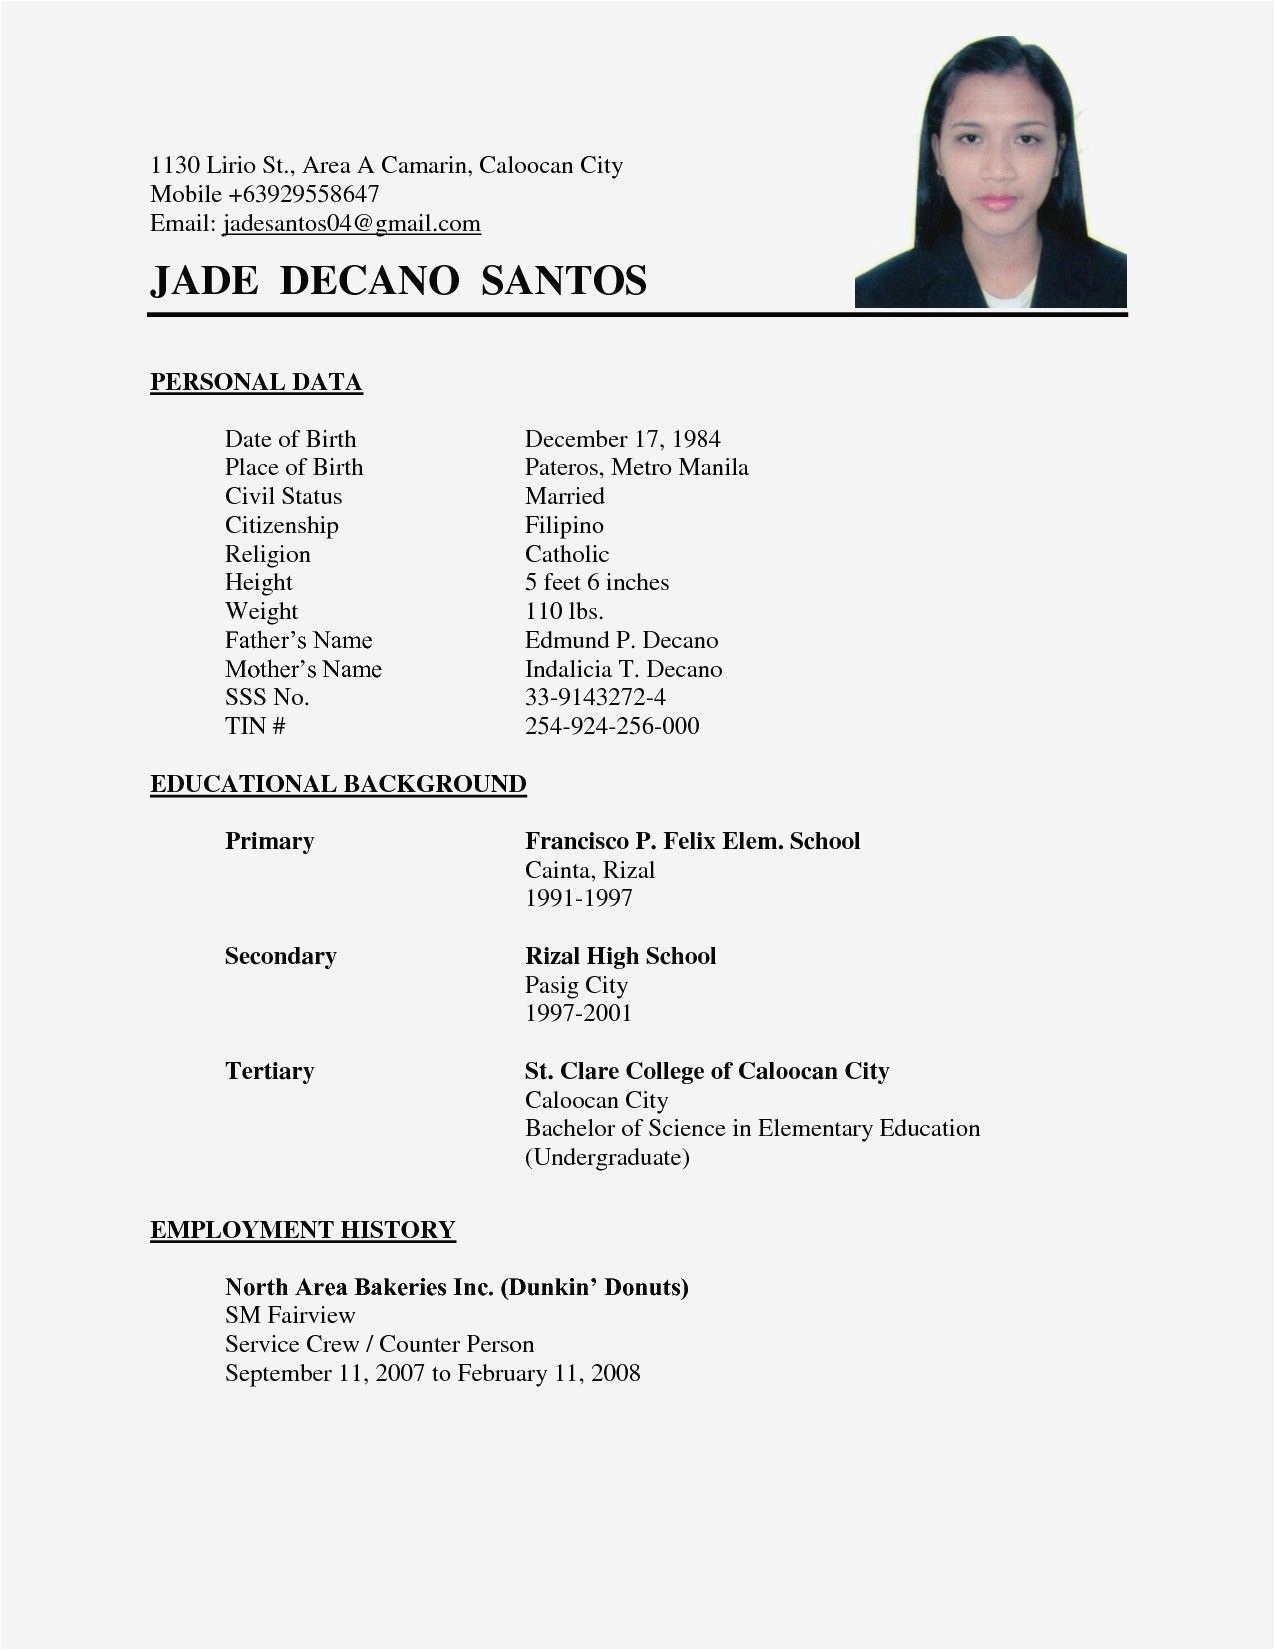 Sample Of Simple Resume for Job Application Simple Sample Resume for Job Application Best Resume